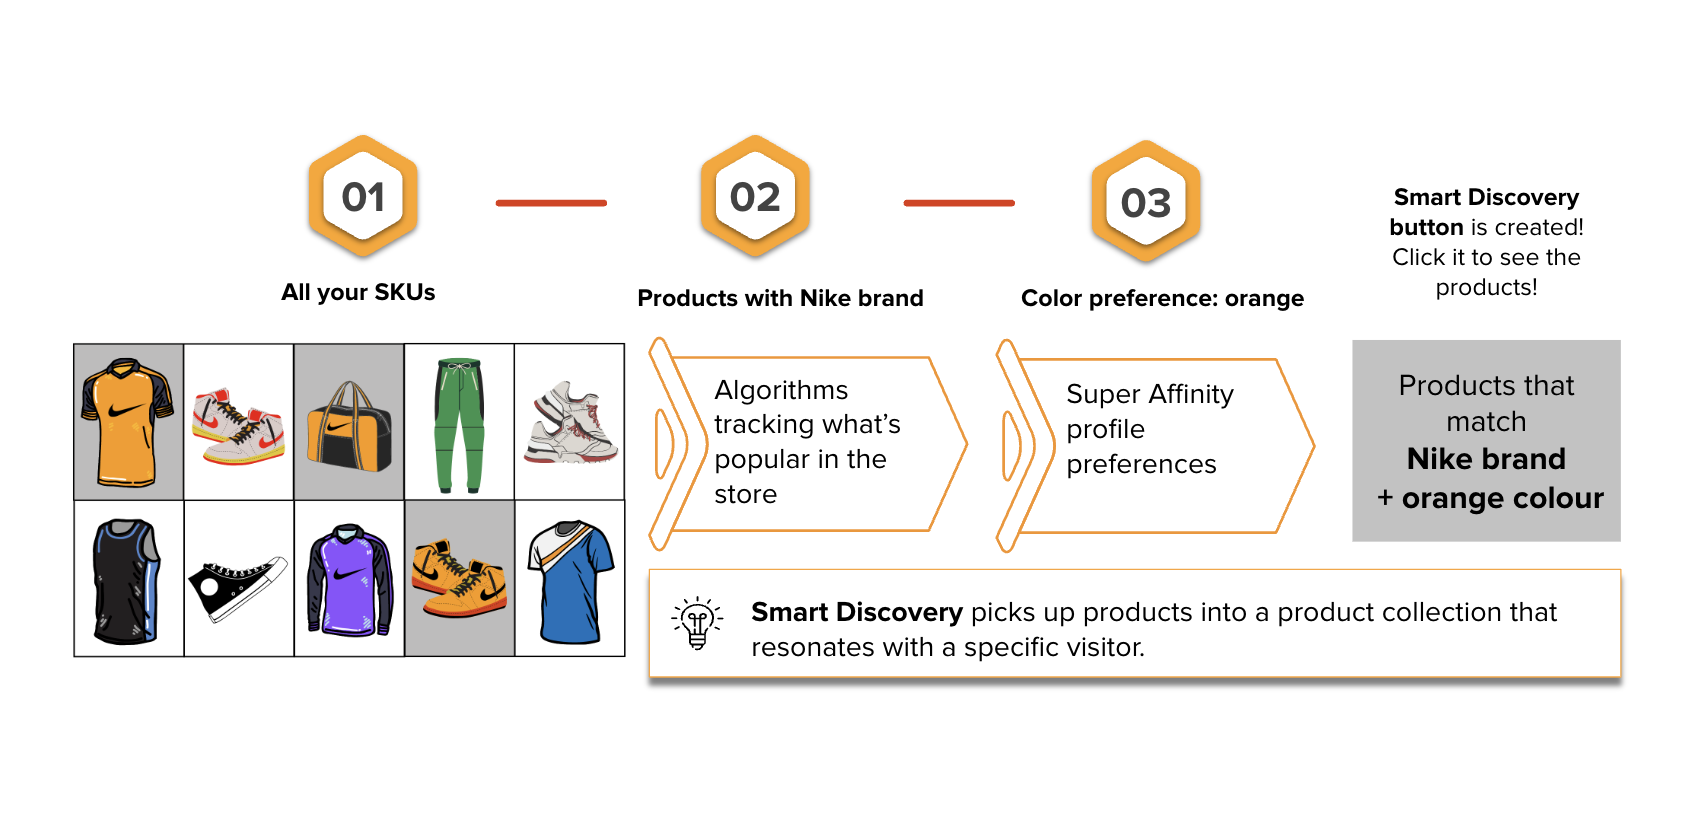 Smart Discovery is a visual search solution that dynamically recommends visitors what to search